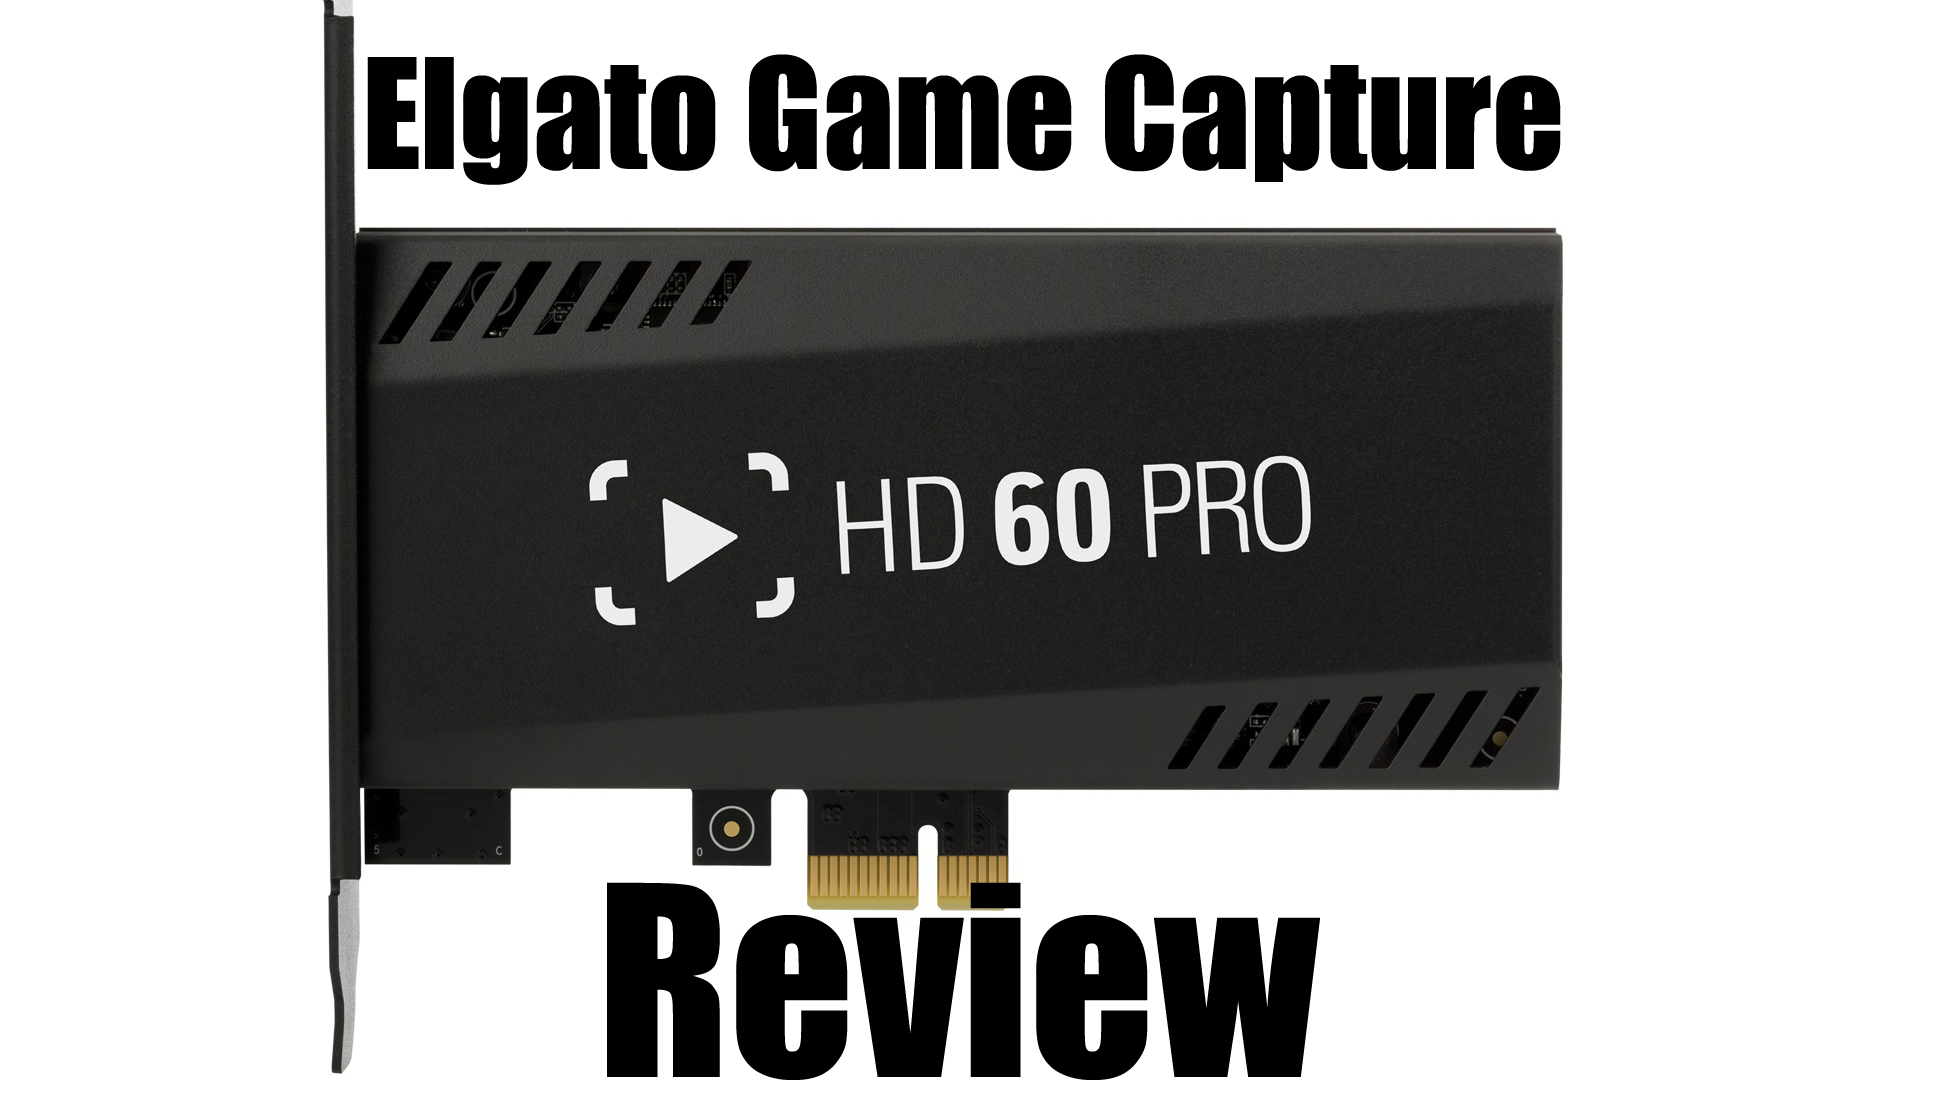 Elgato Game Capture HD60 Pro Review | hXcHector.com